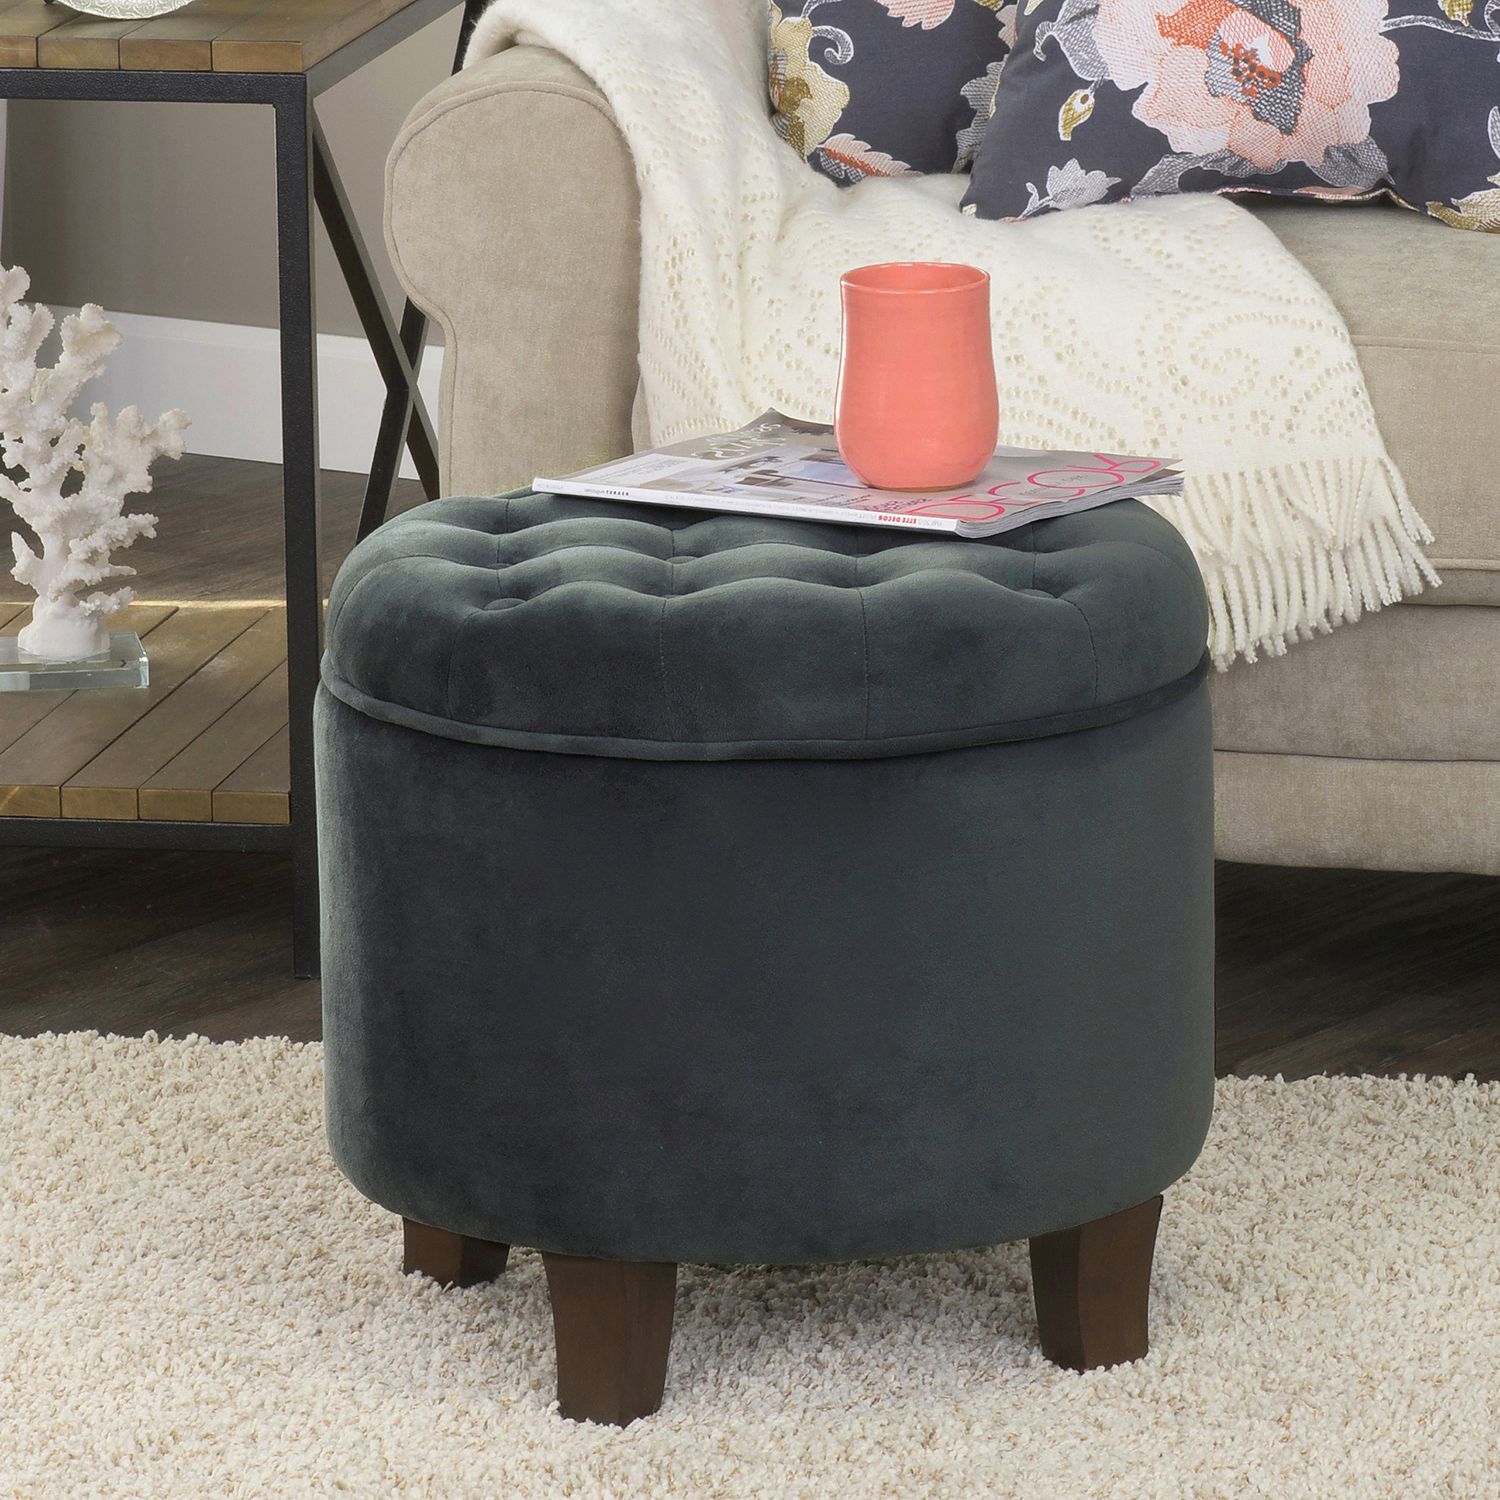 Widely Used Velvet Ribbed Fabric Round Storage Ottomans Intended For Gray Velvet Round Storage Ottoman – Pier (View 8 of 10)